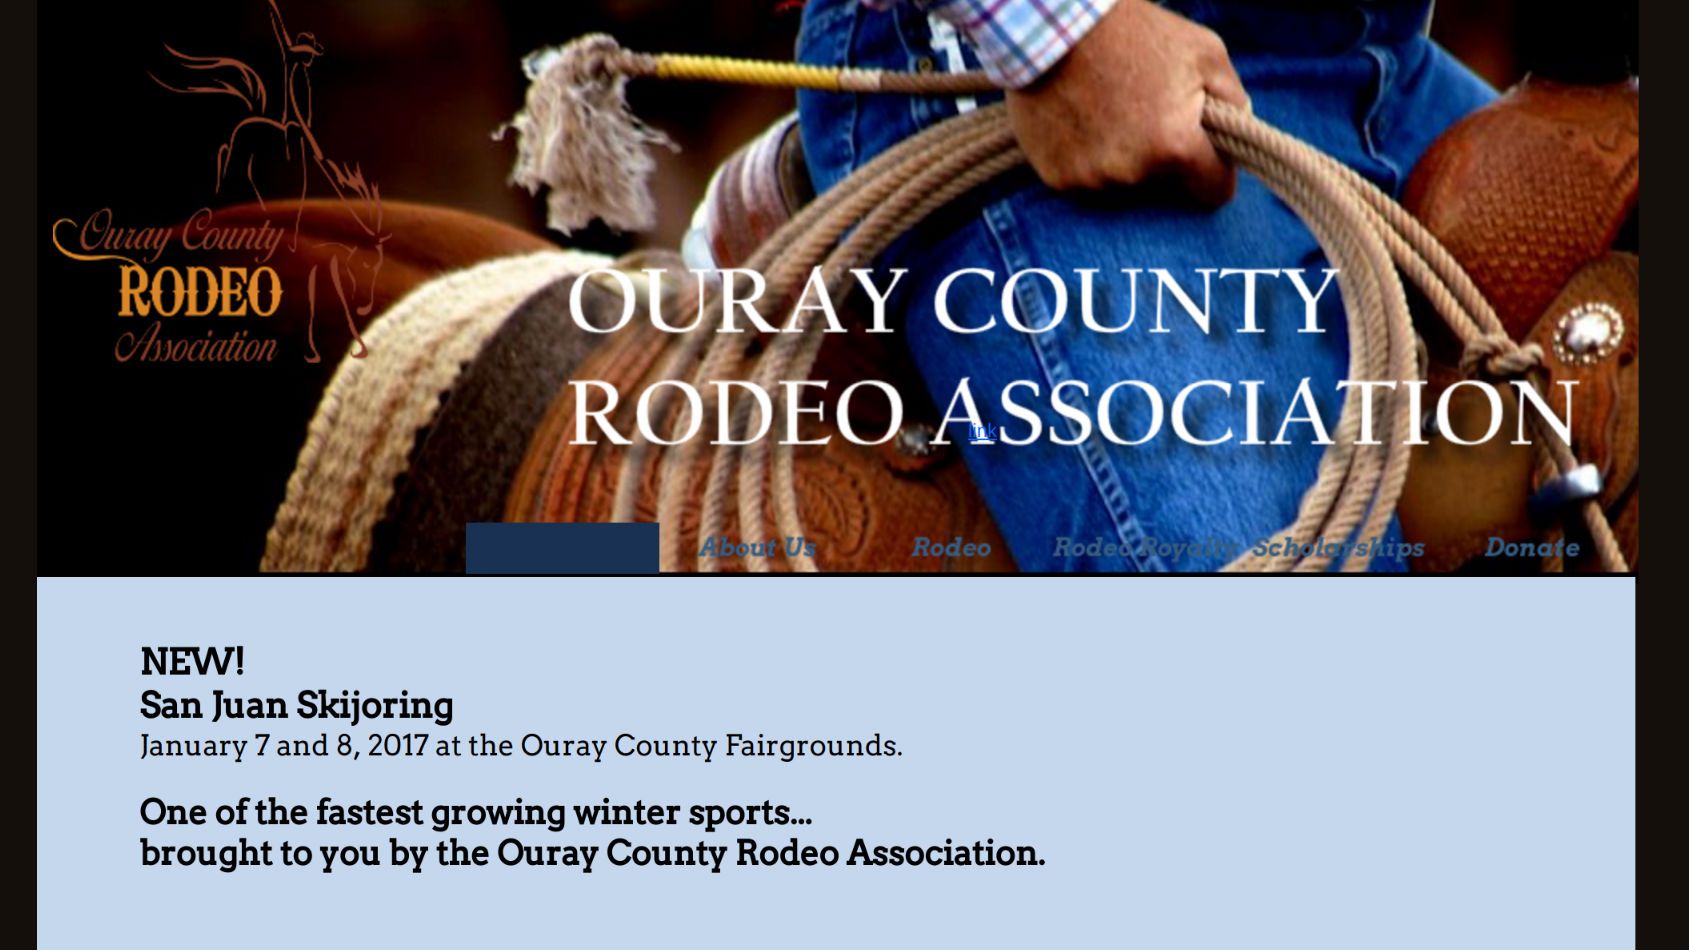 Ouray County Rodeo Association